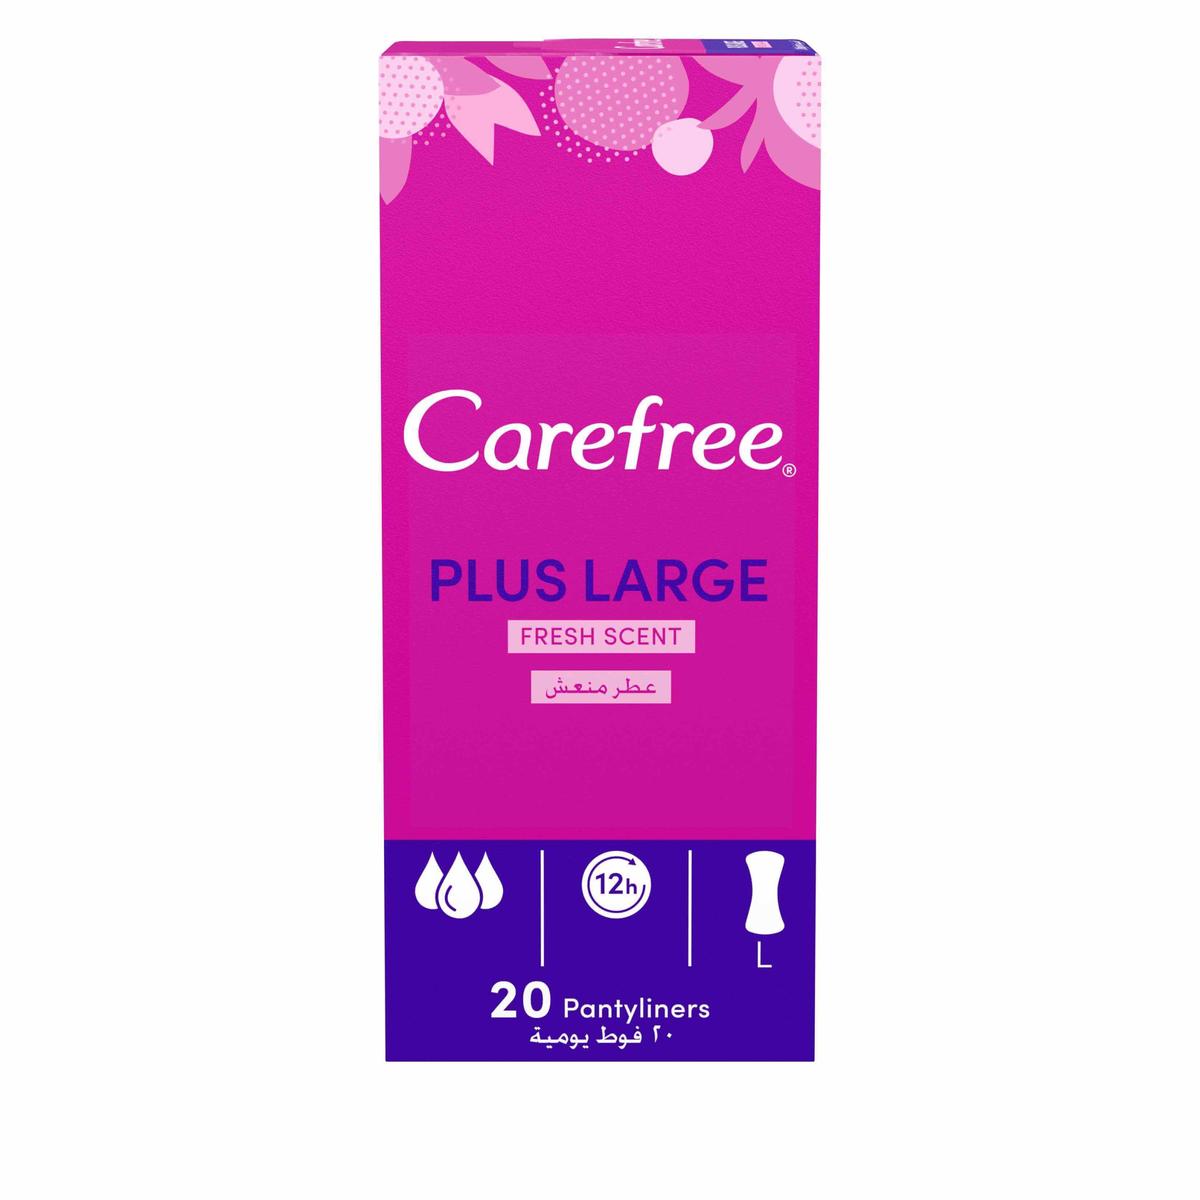 Carefree Plus Large Panty Liners Fresh Scent 20 pack